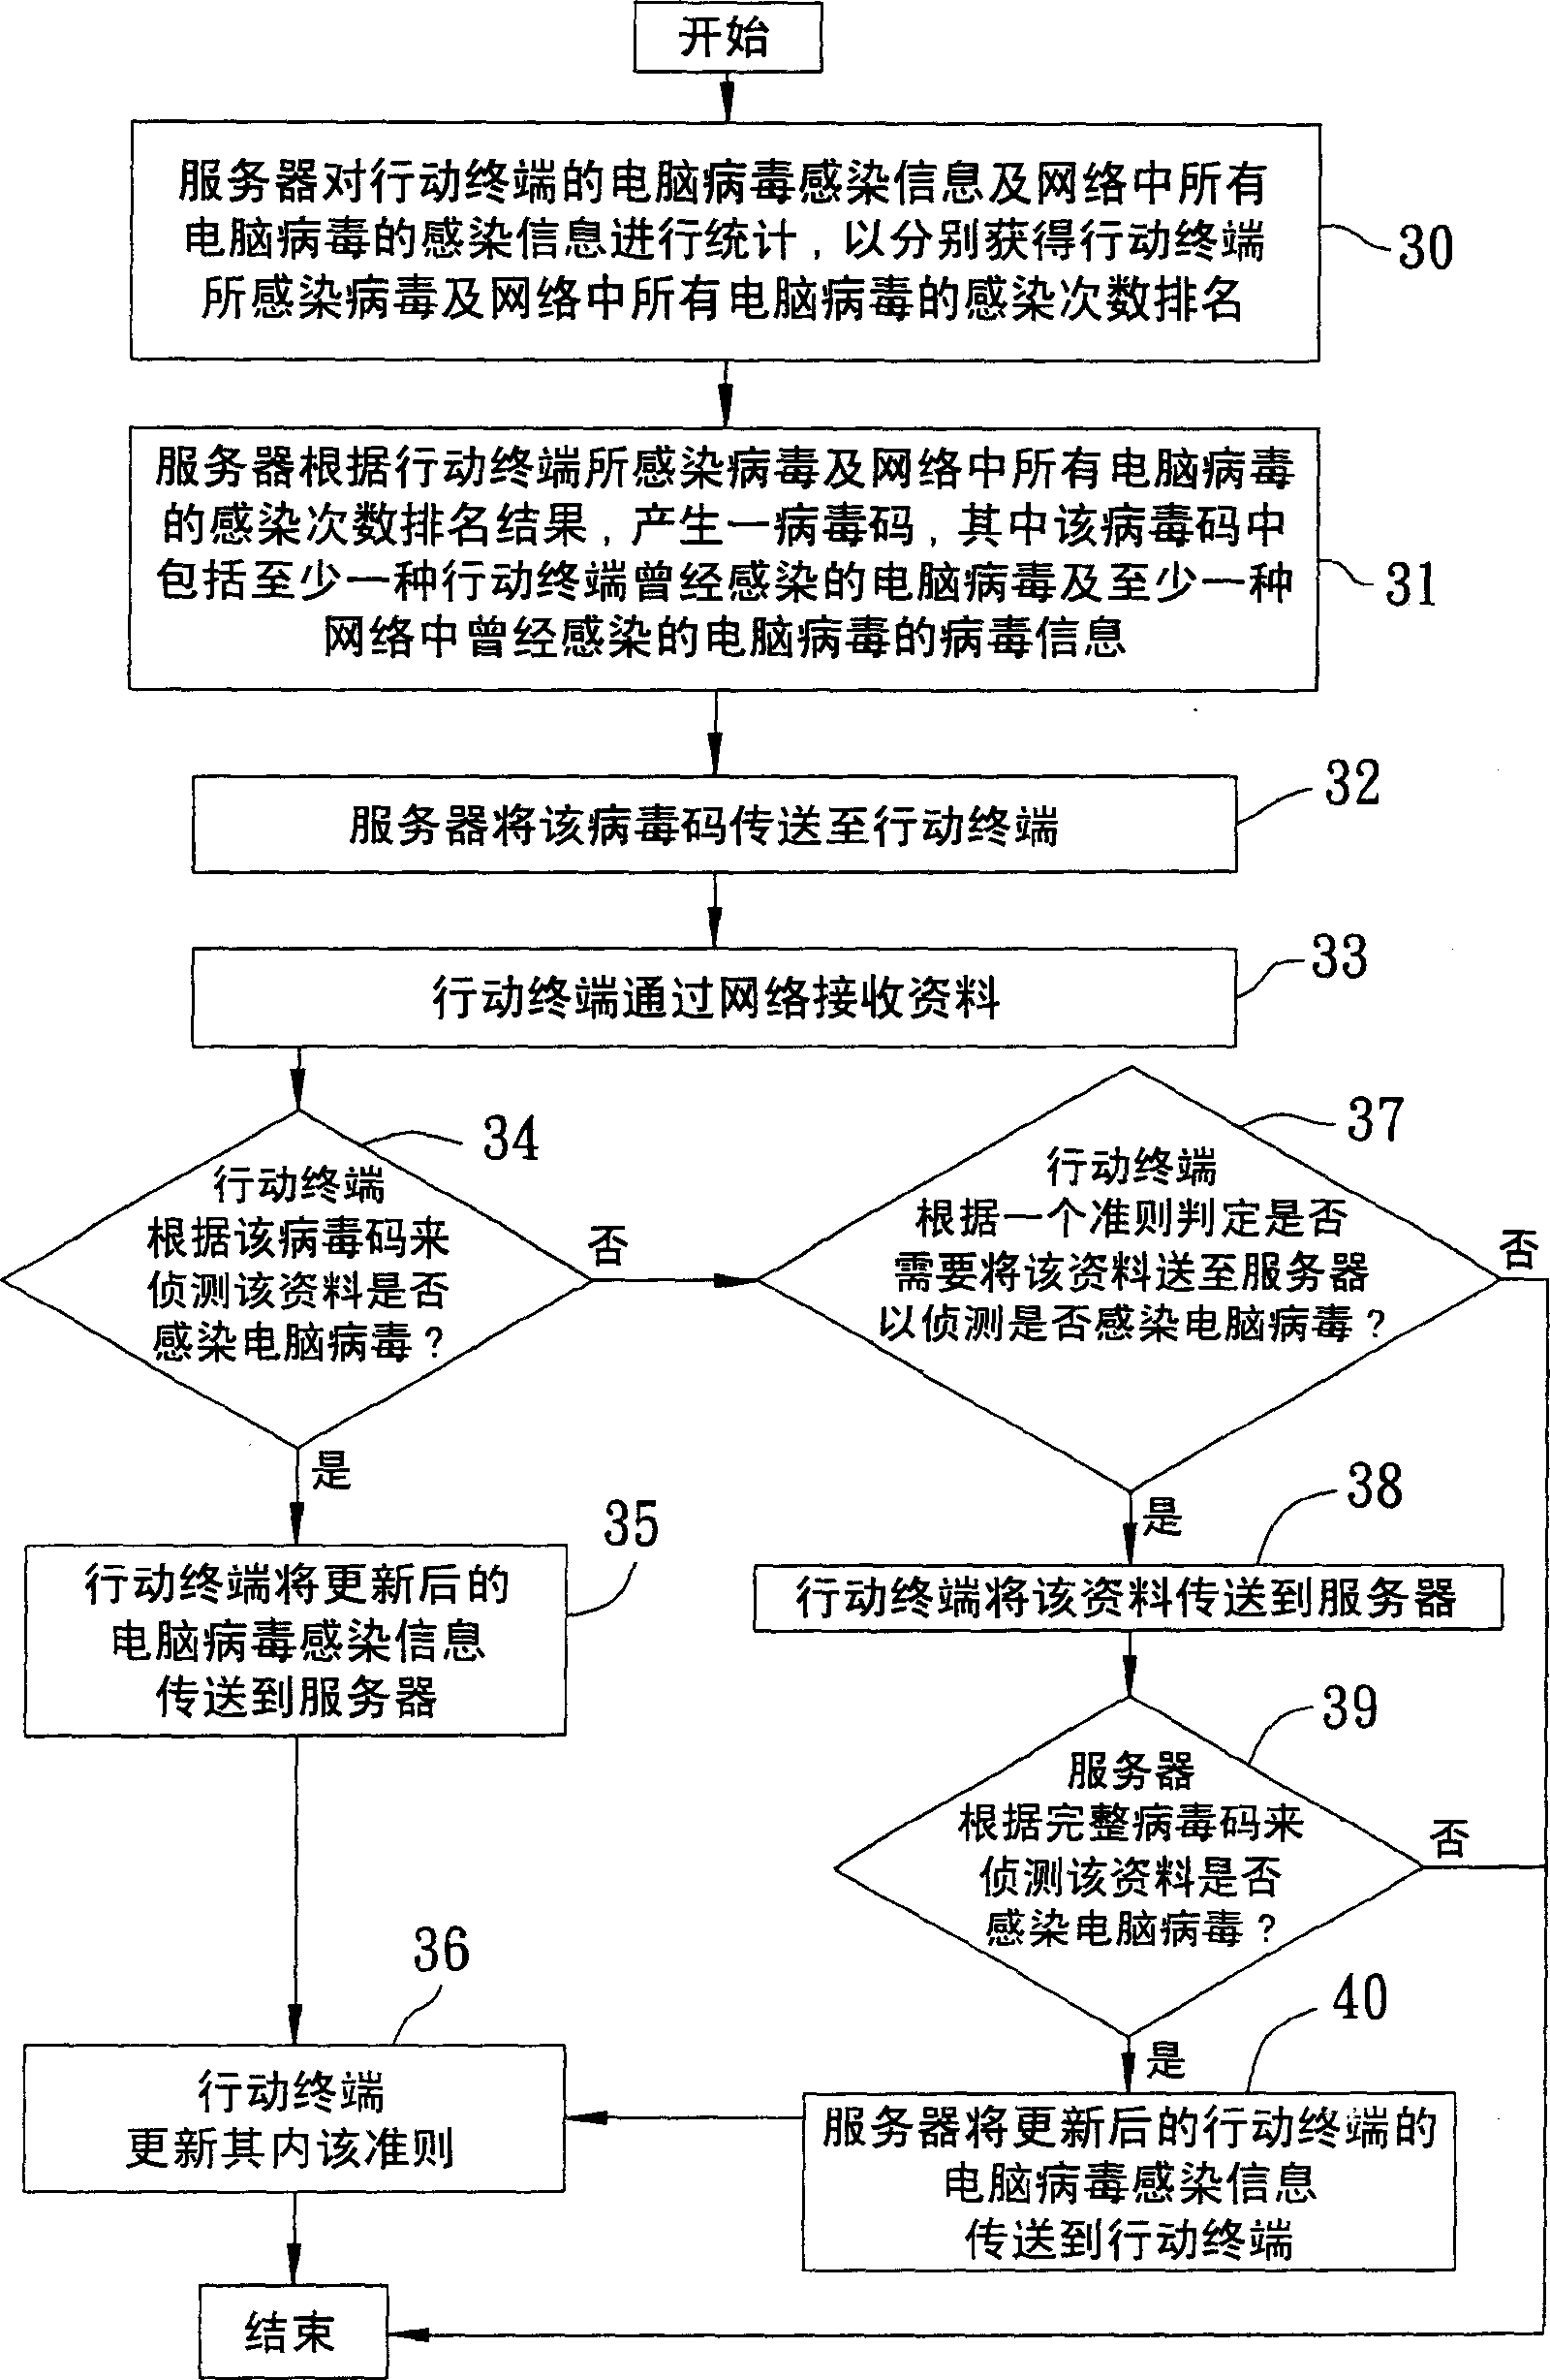 Method for detecting computer virus and its application